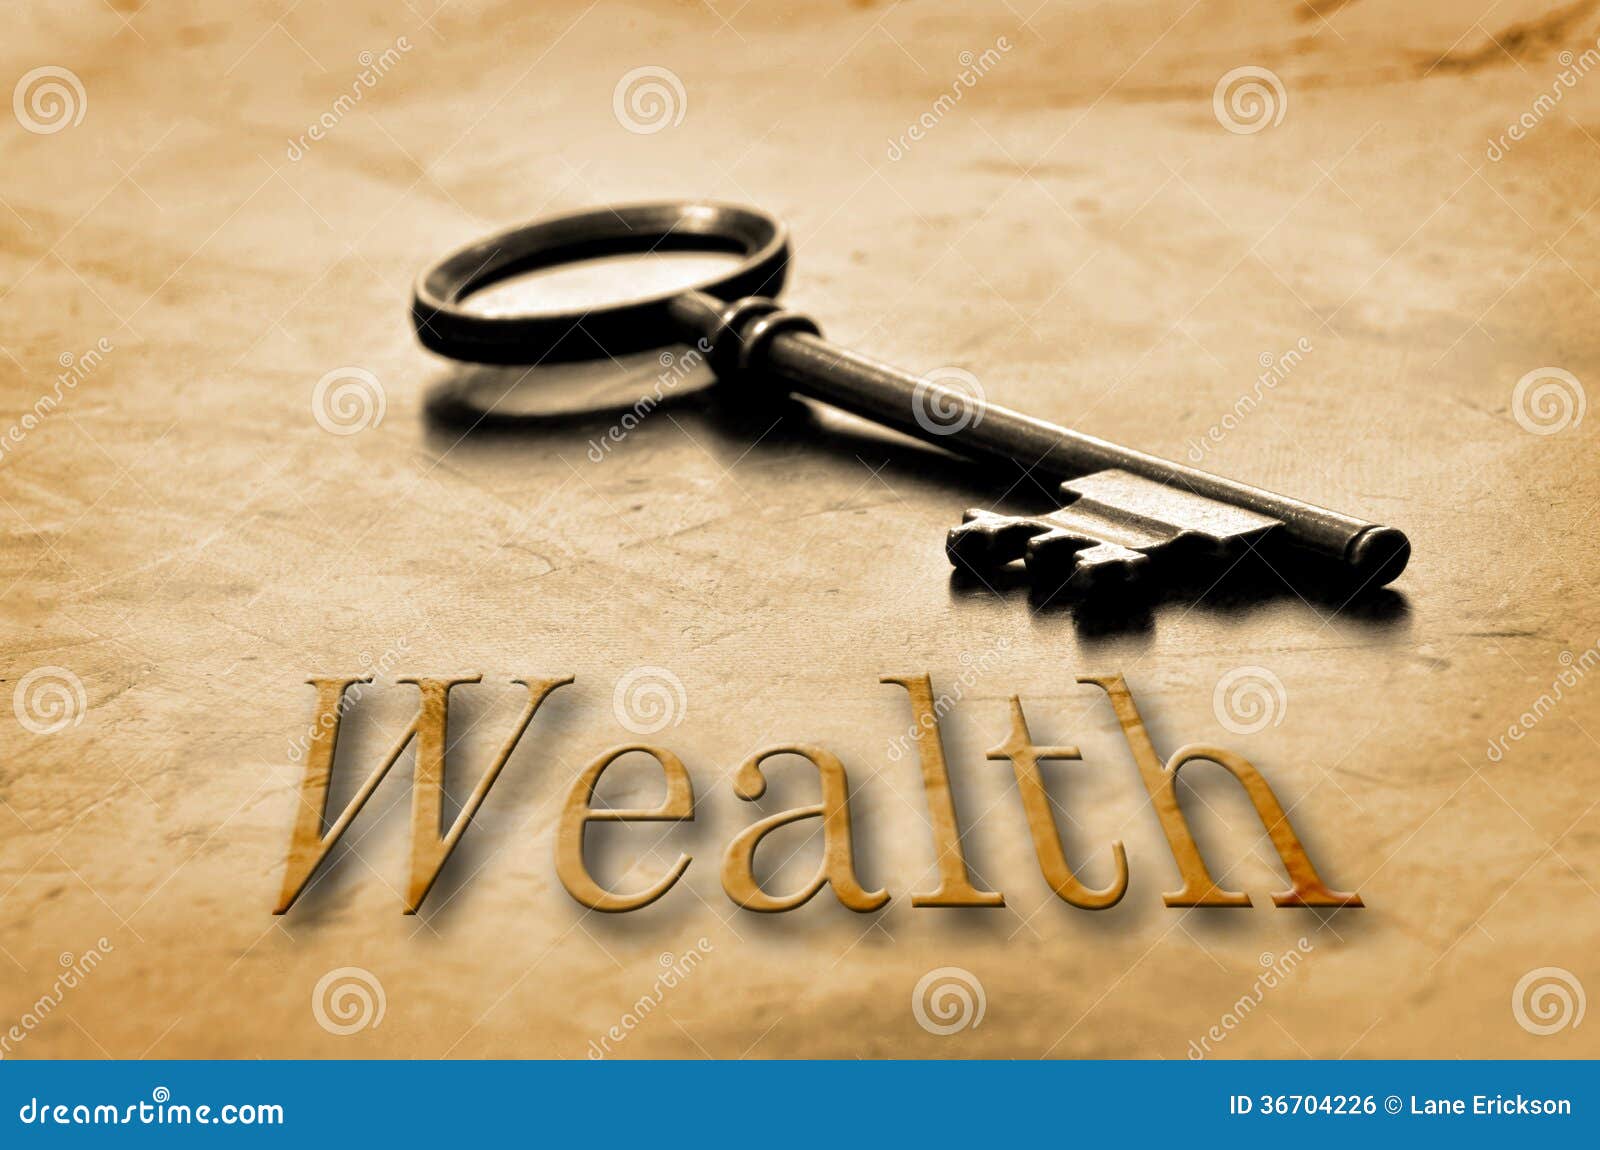 key to wealth and riches